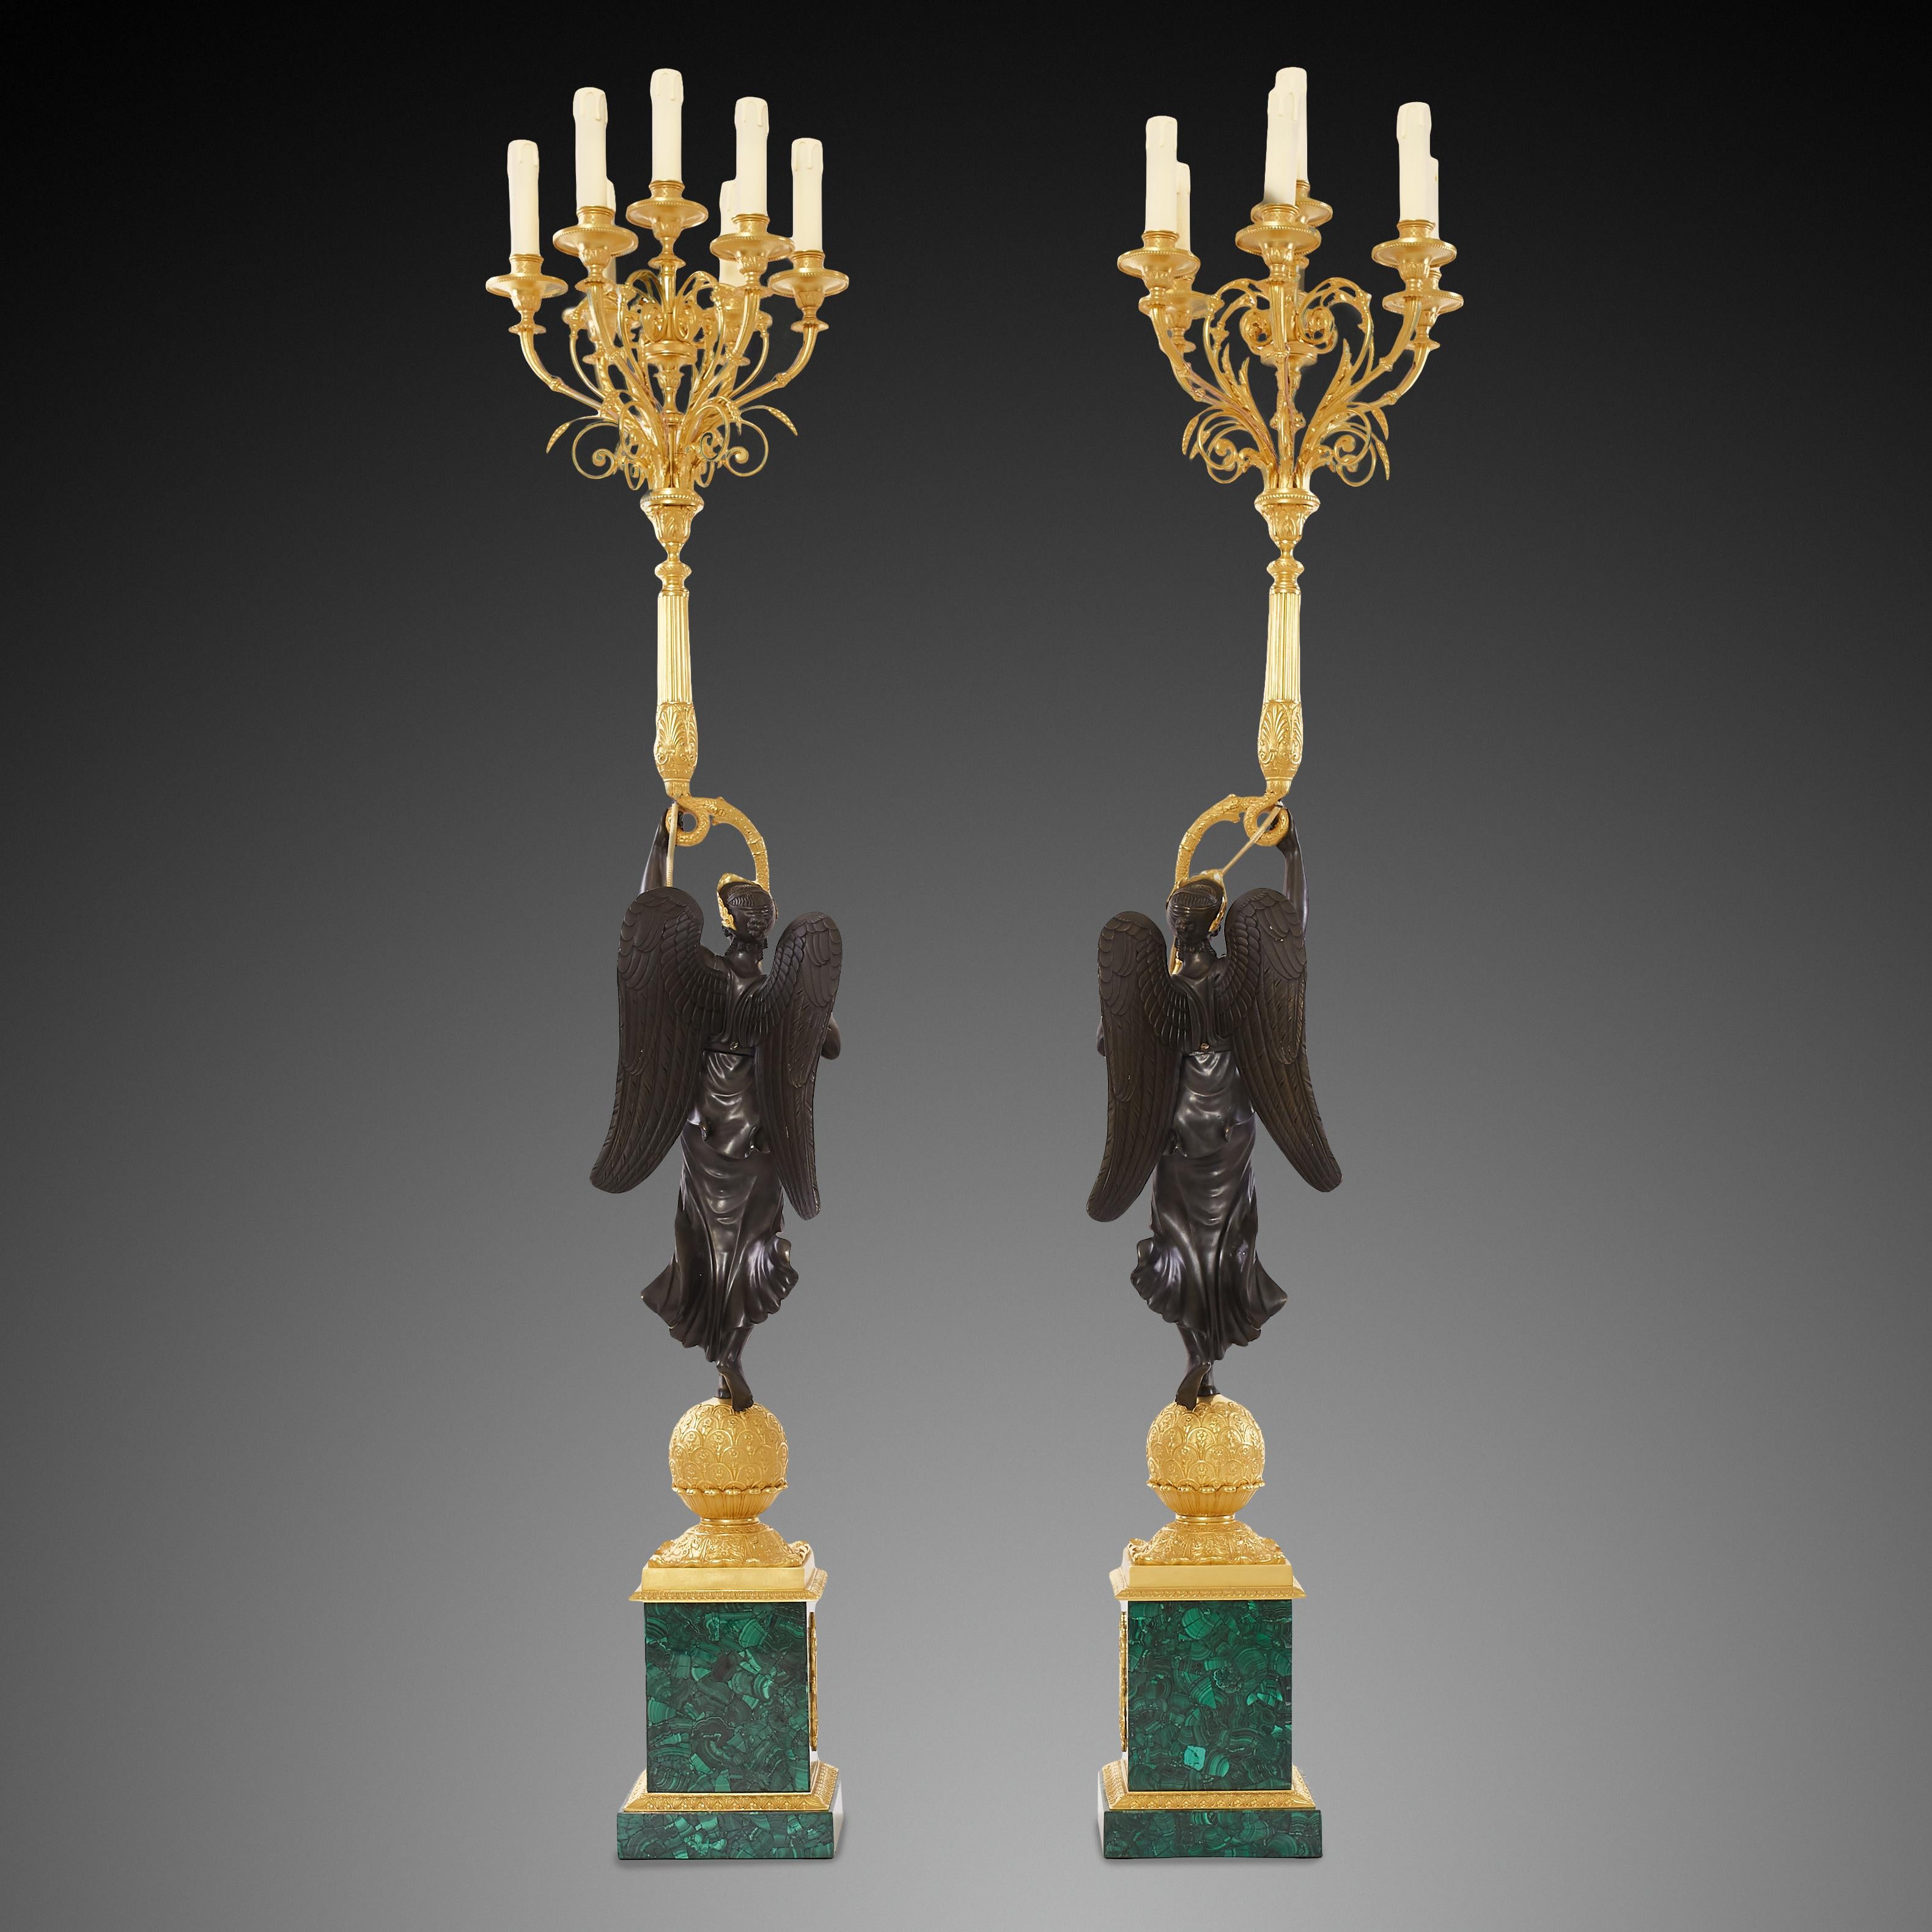 These antique candelabras are a wonderful combination of three contrasting tones: the golden color of gilt , the black color of the bronze that makes the angel figure a focal point and the deep green color of malachite brings high aesthetics